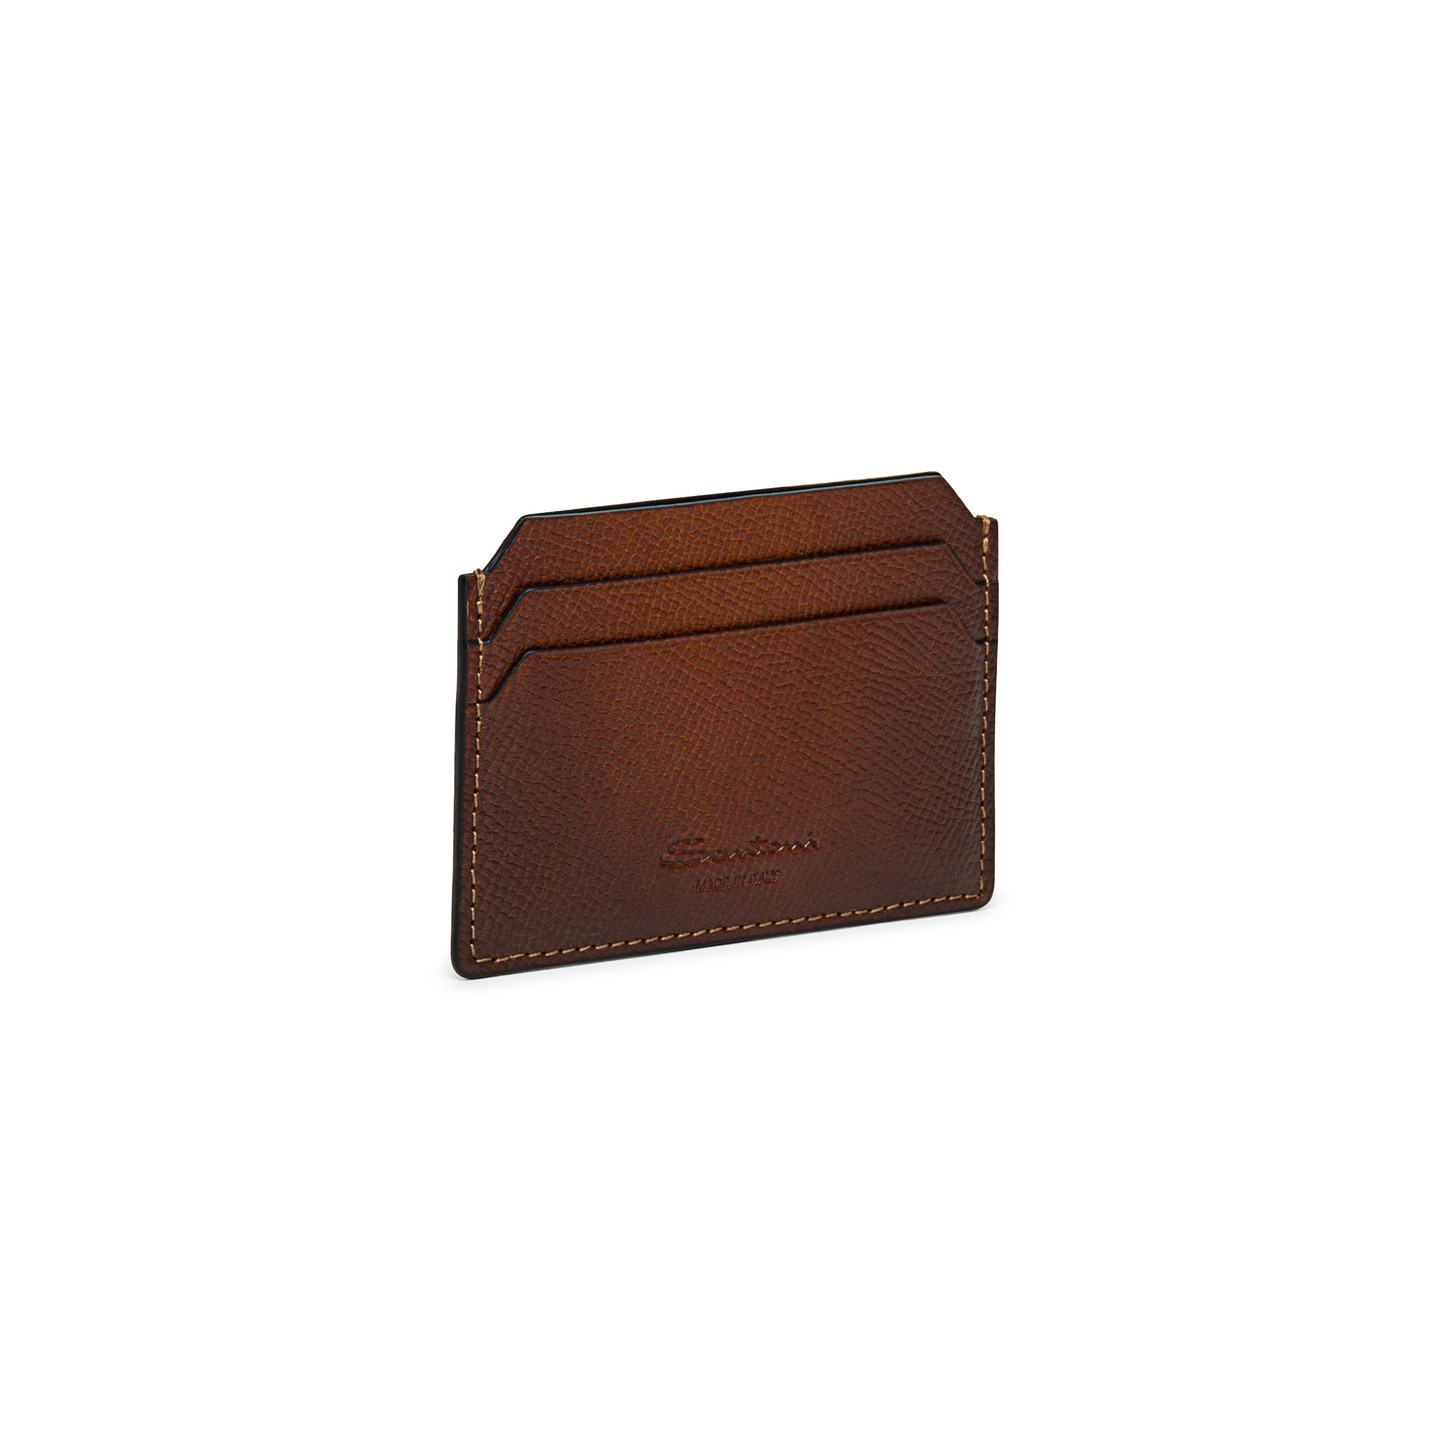 Brown saffiano leather credit card holder - 5